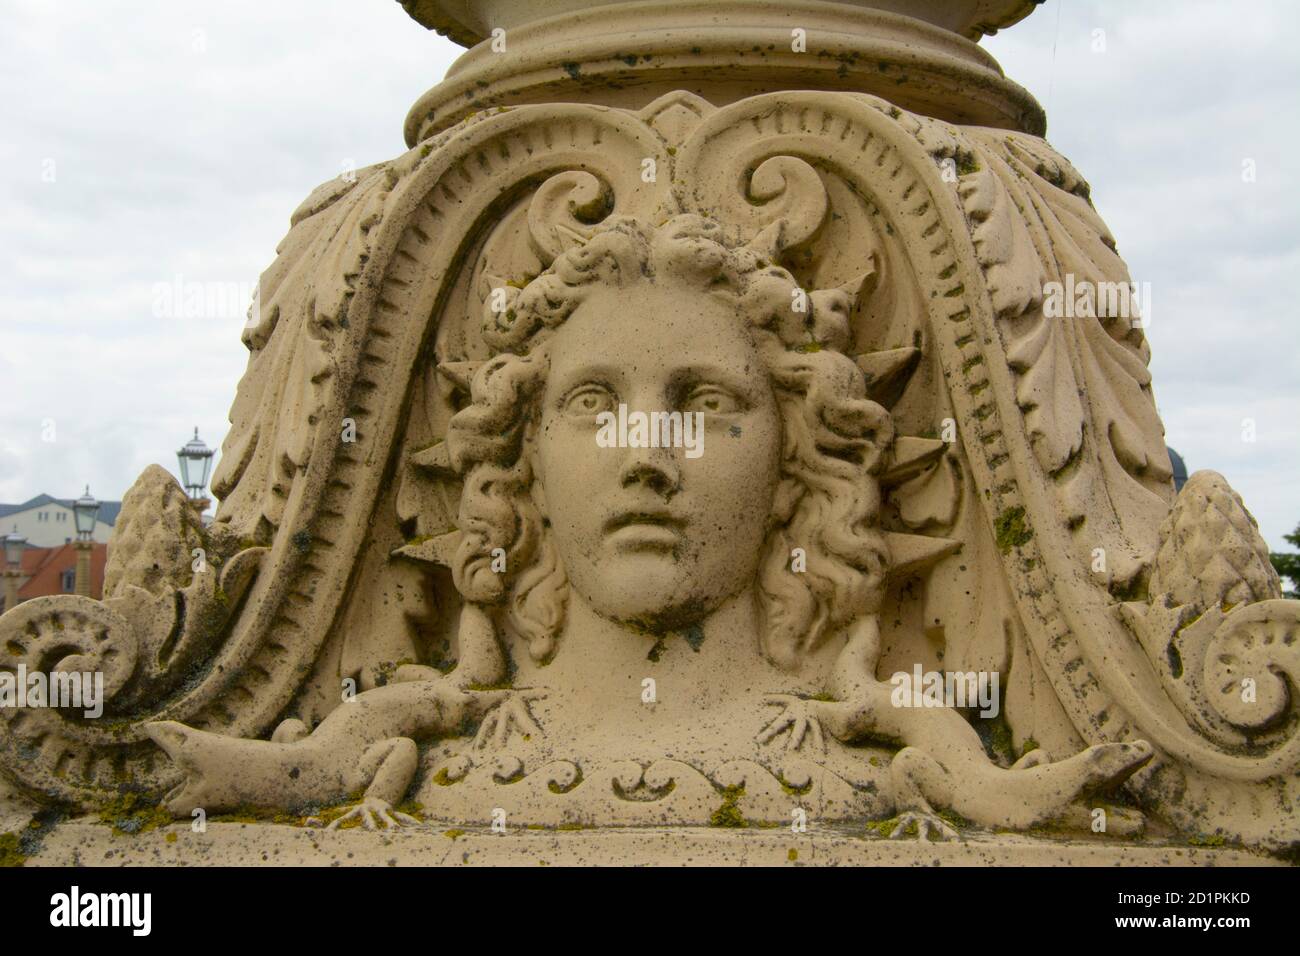 Detail of statuary in the gardens of Schloss Schwerin, once the seat of the Duchy of Mecklenburg.  Mecklenburg-Vorpommern, Germany Stock Photo